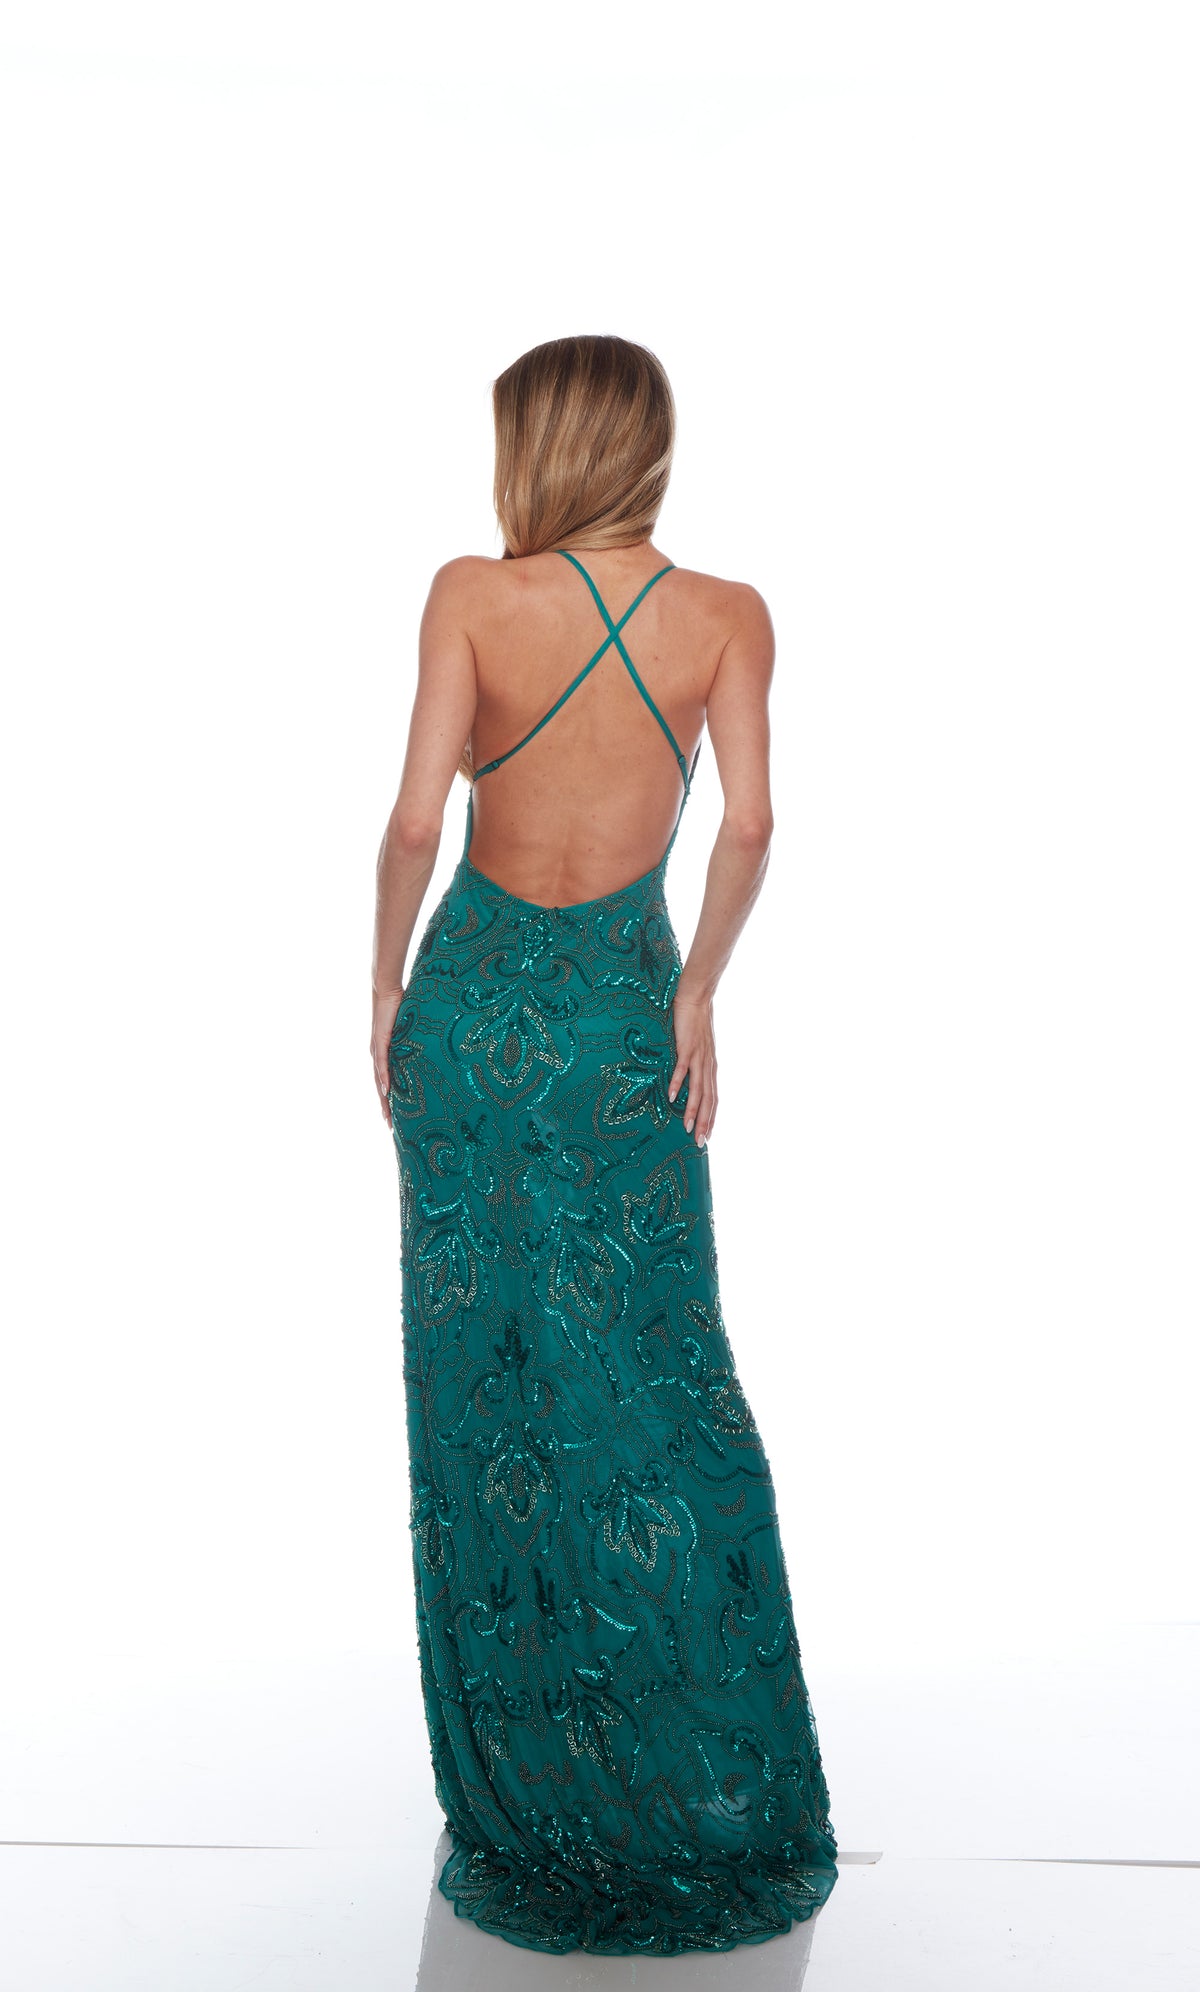 Elegant blue-green formal gown: Hand-beaded, V neckline, spaghetti straps, strappy back, and intricate floral design for an chic and sophisticated look.